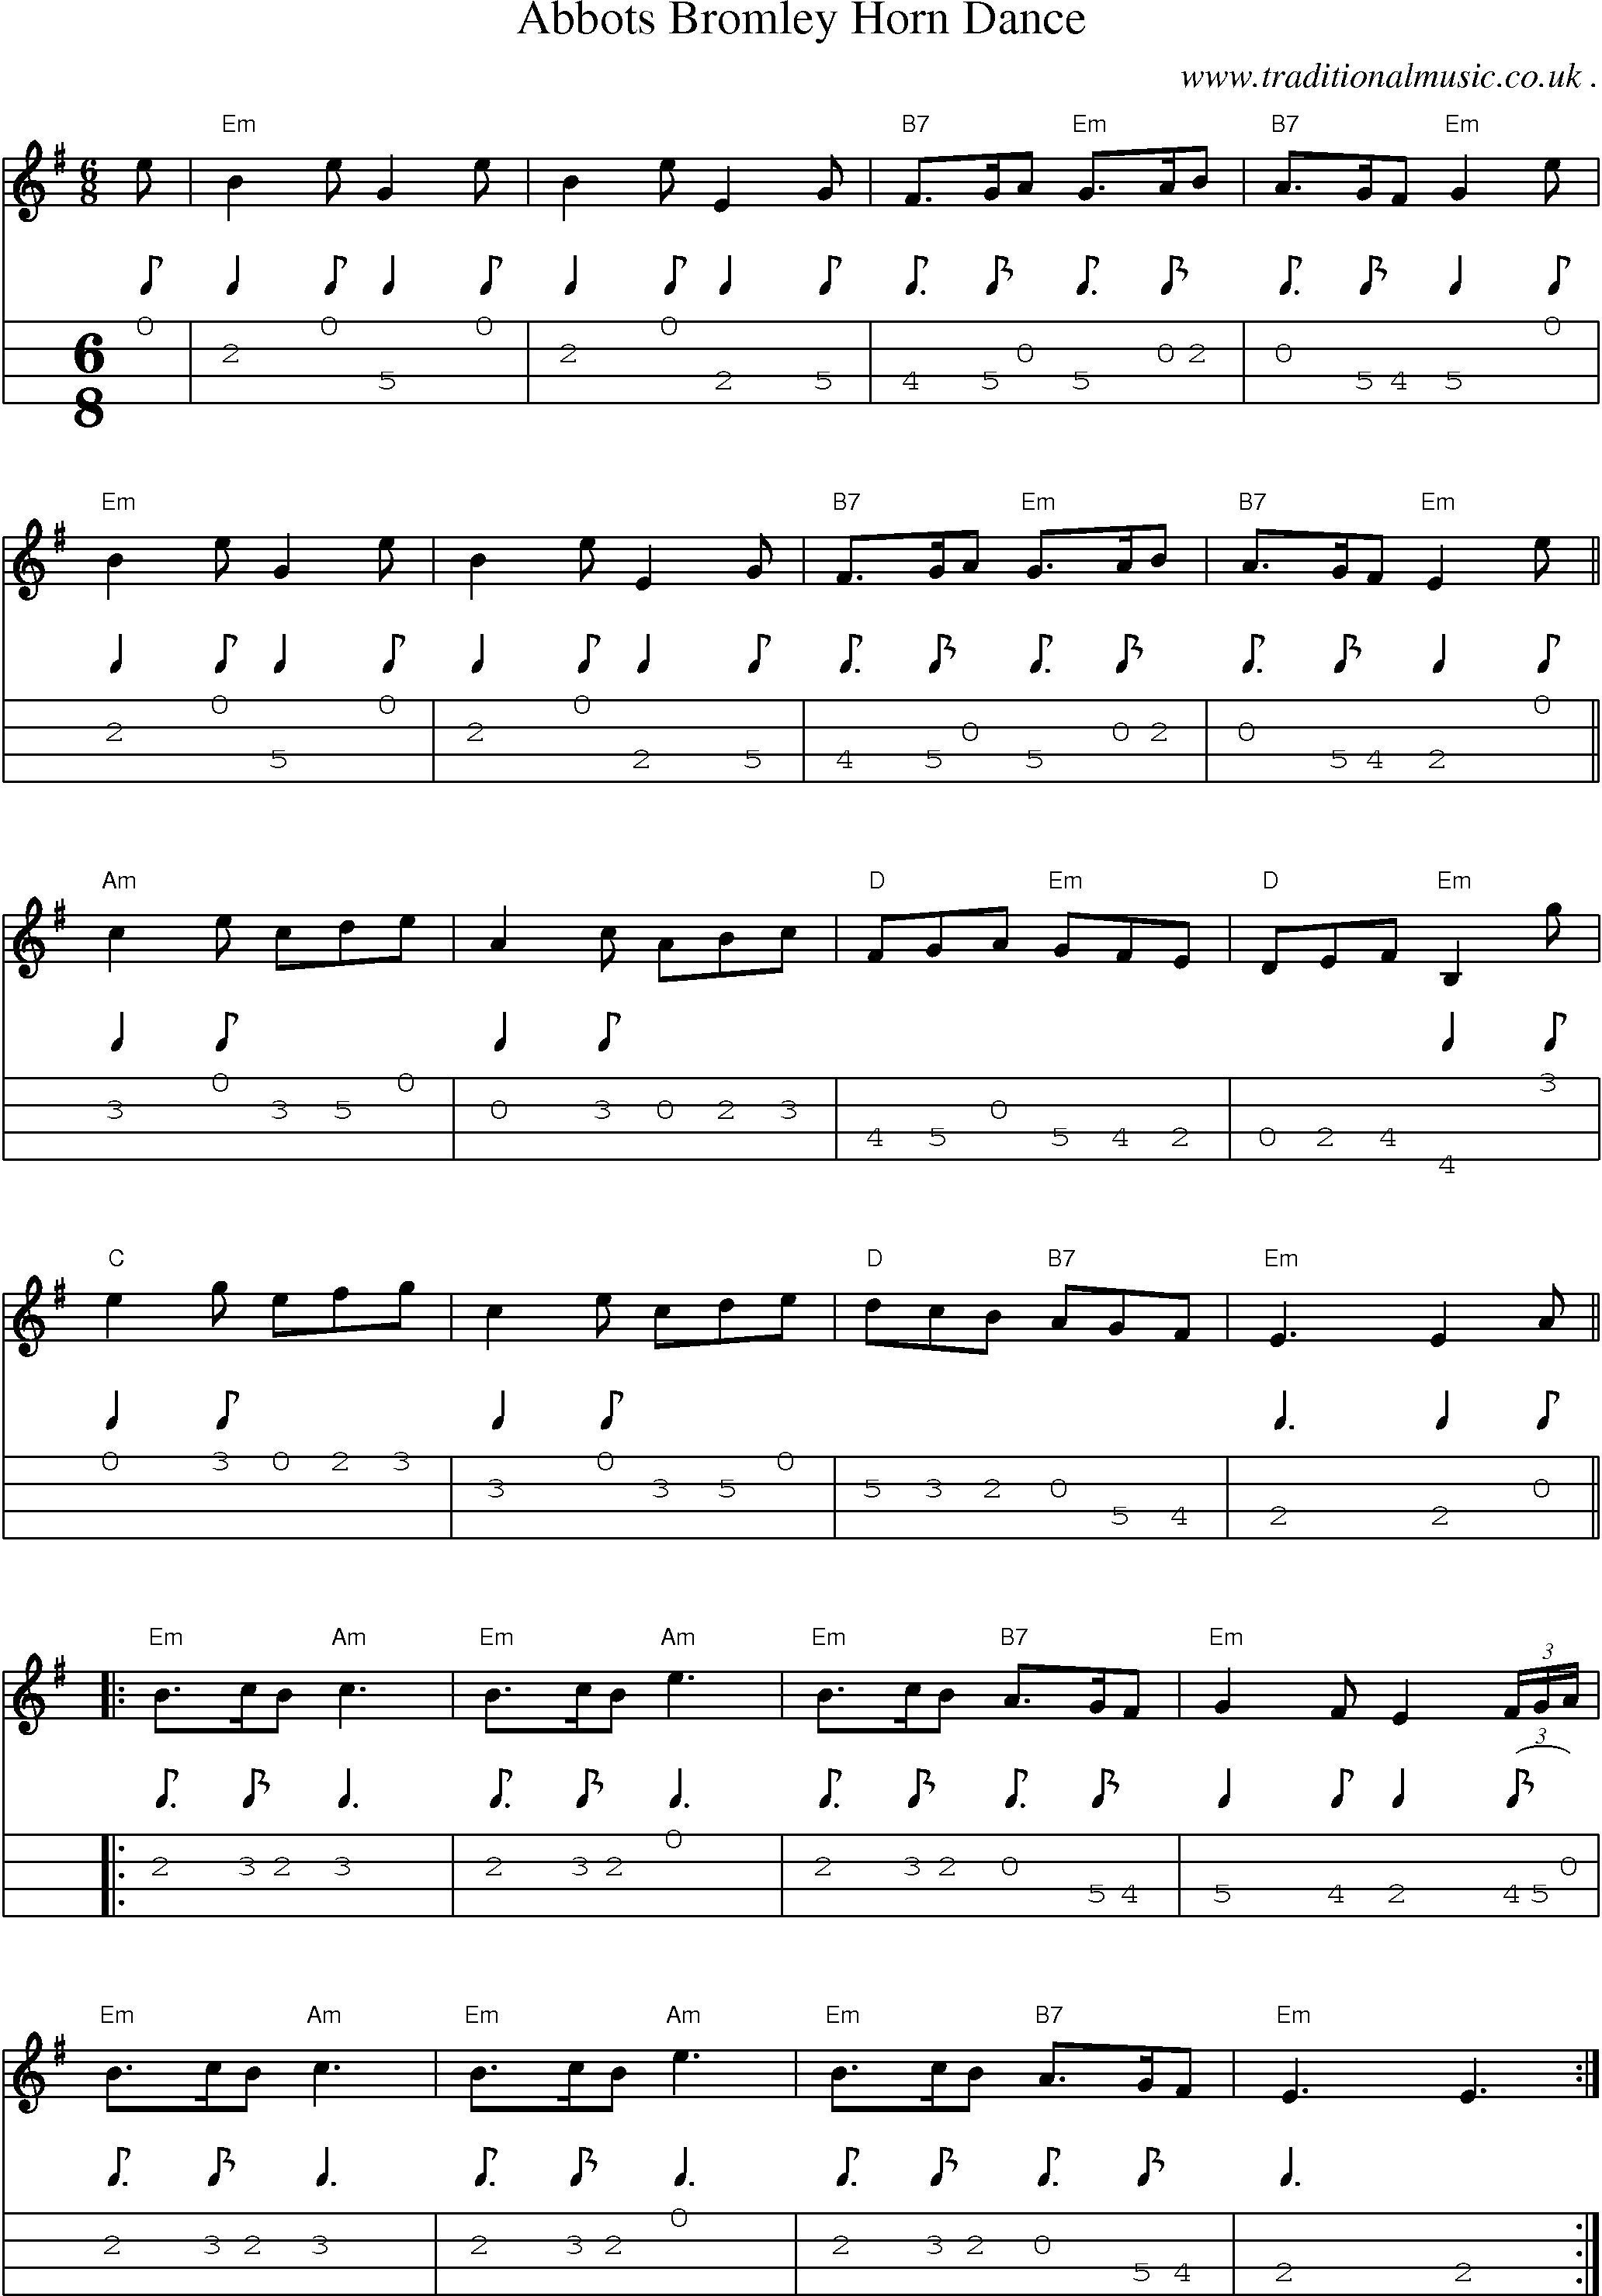 Music Score and Guitar Tabs for Abbots Bromley Horn Dance